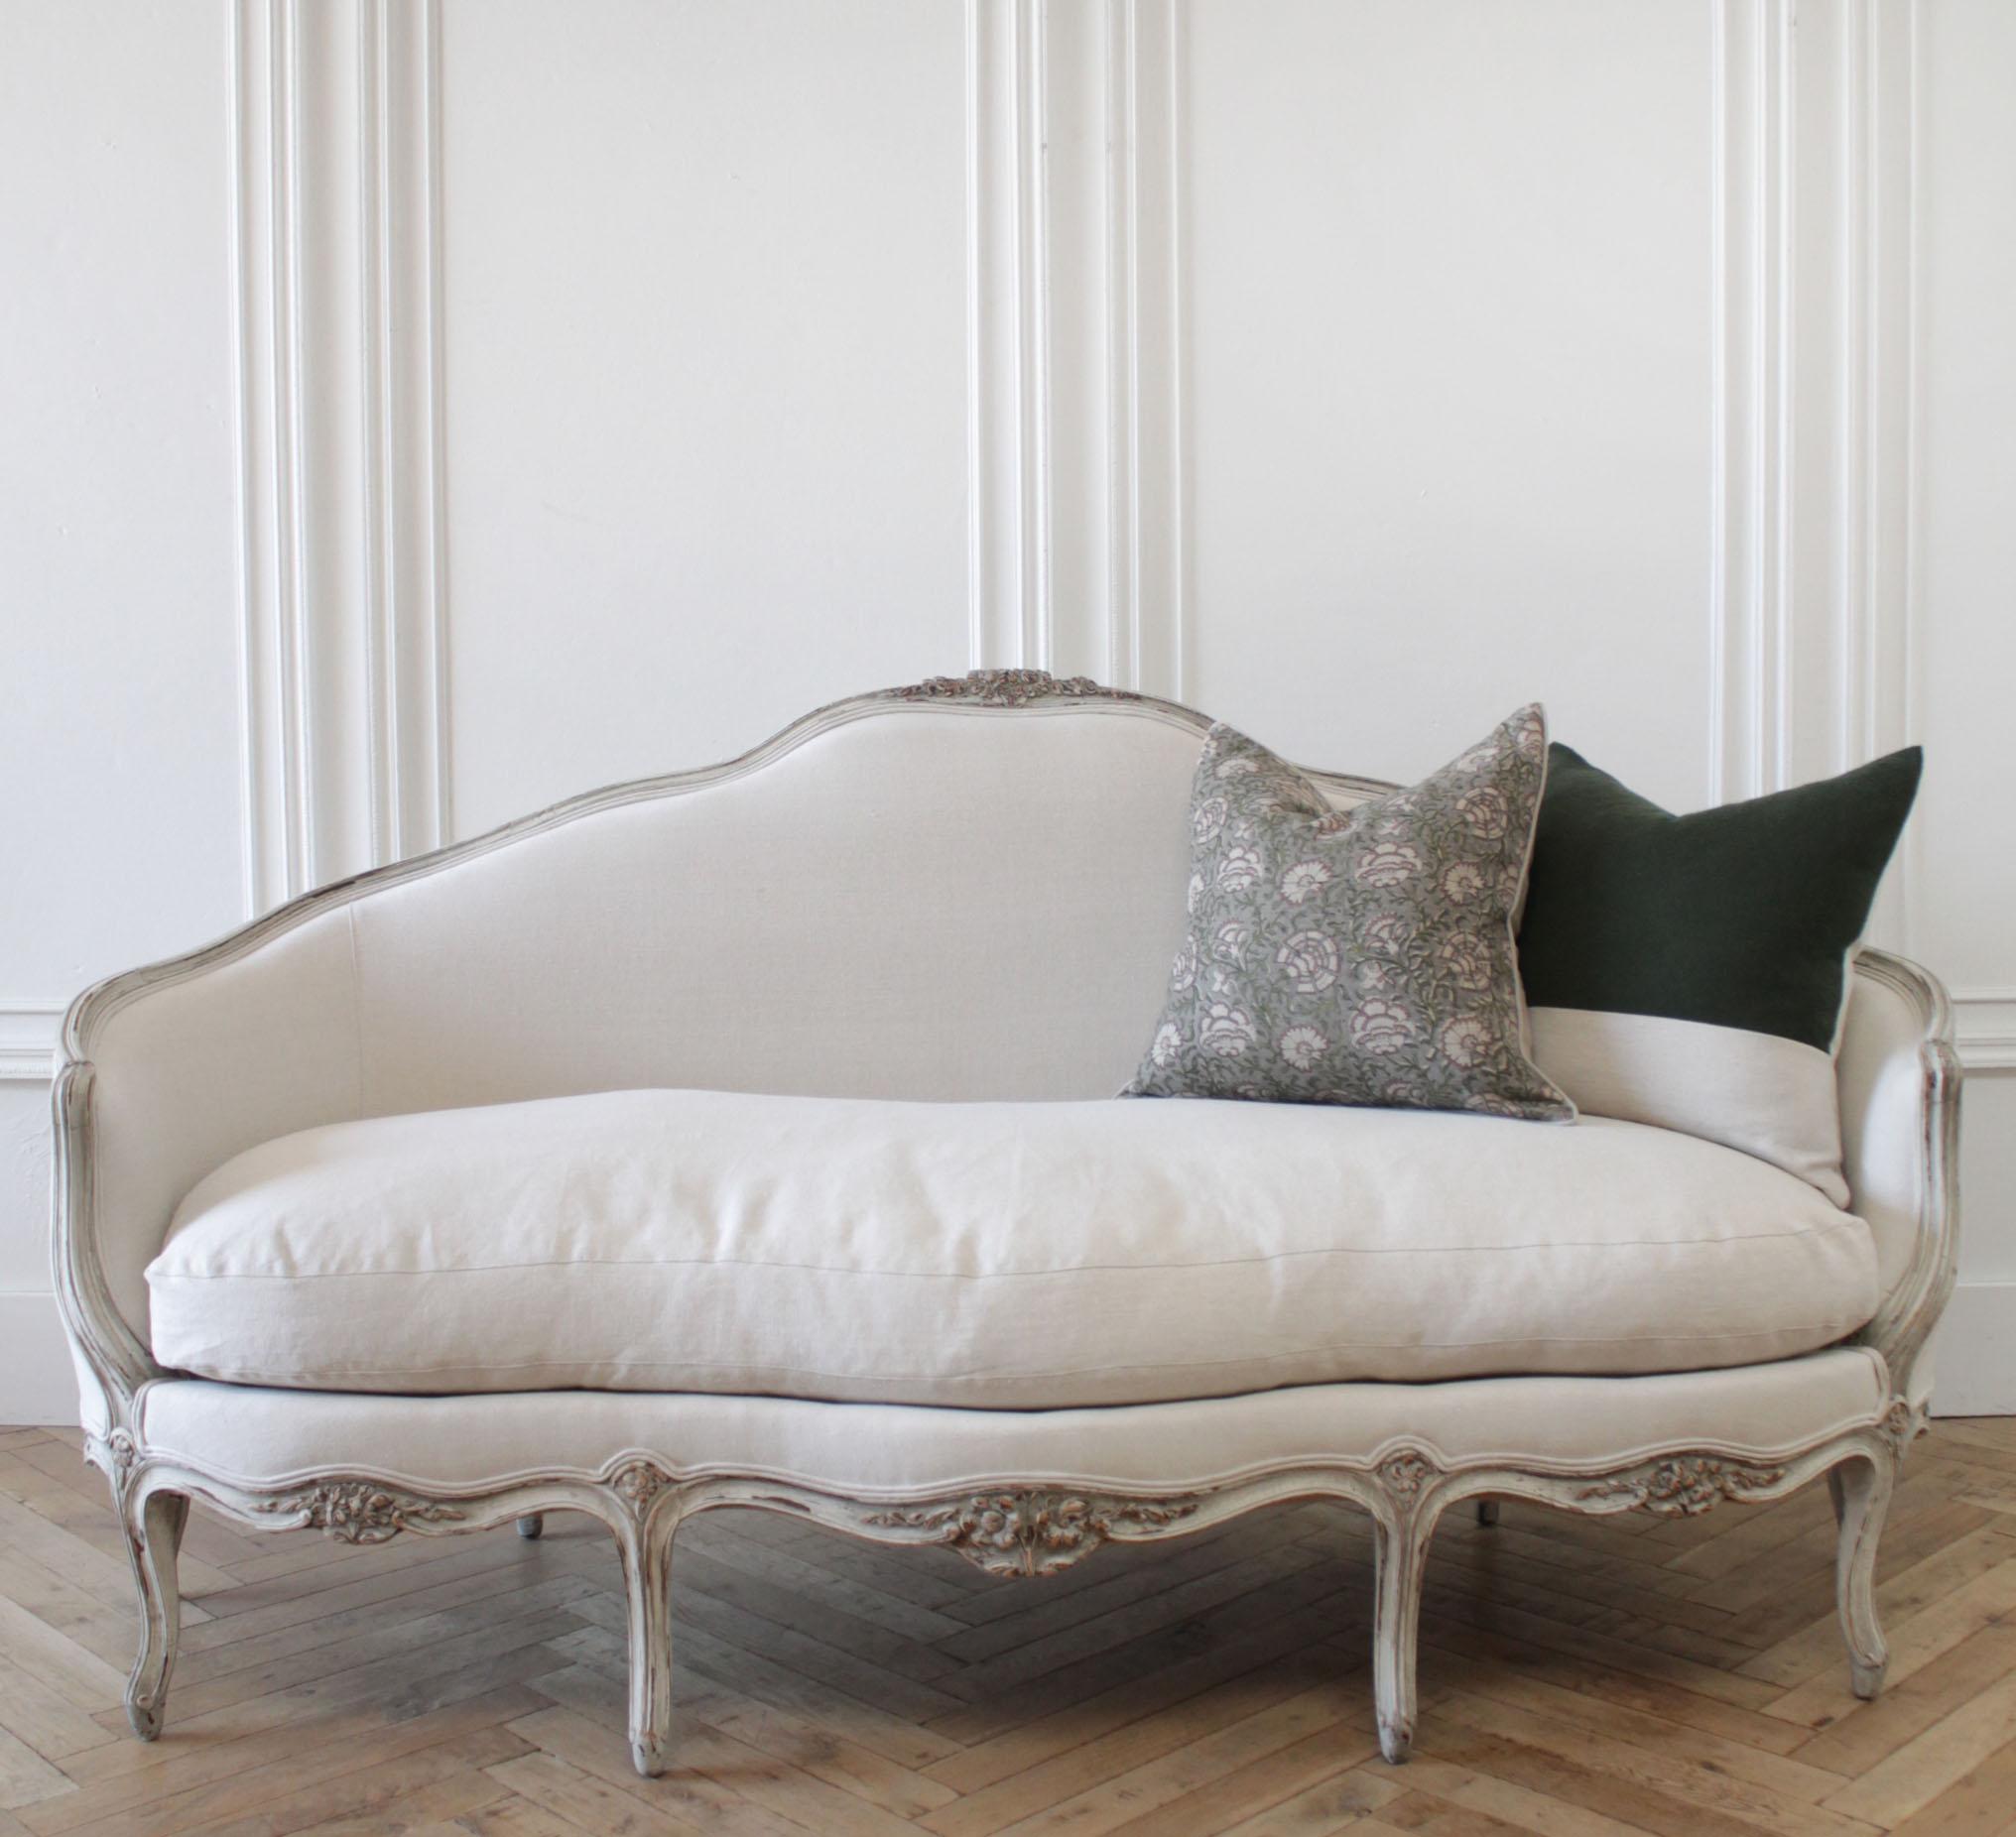 19th century antique French Louis XV style sofa
Painted in a light oyster white, with subtle distressed edges, and finished in an oyster antique glazed patina.
Upholstered in 100% pure organic Libeco linen in light natural. A large overstuffed